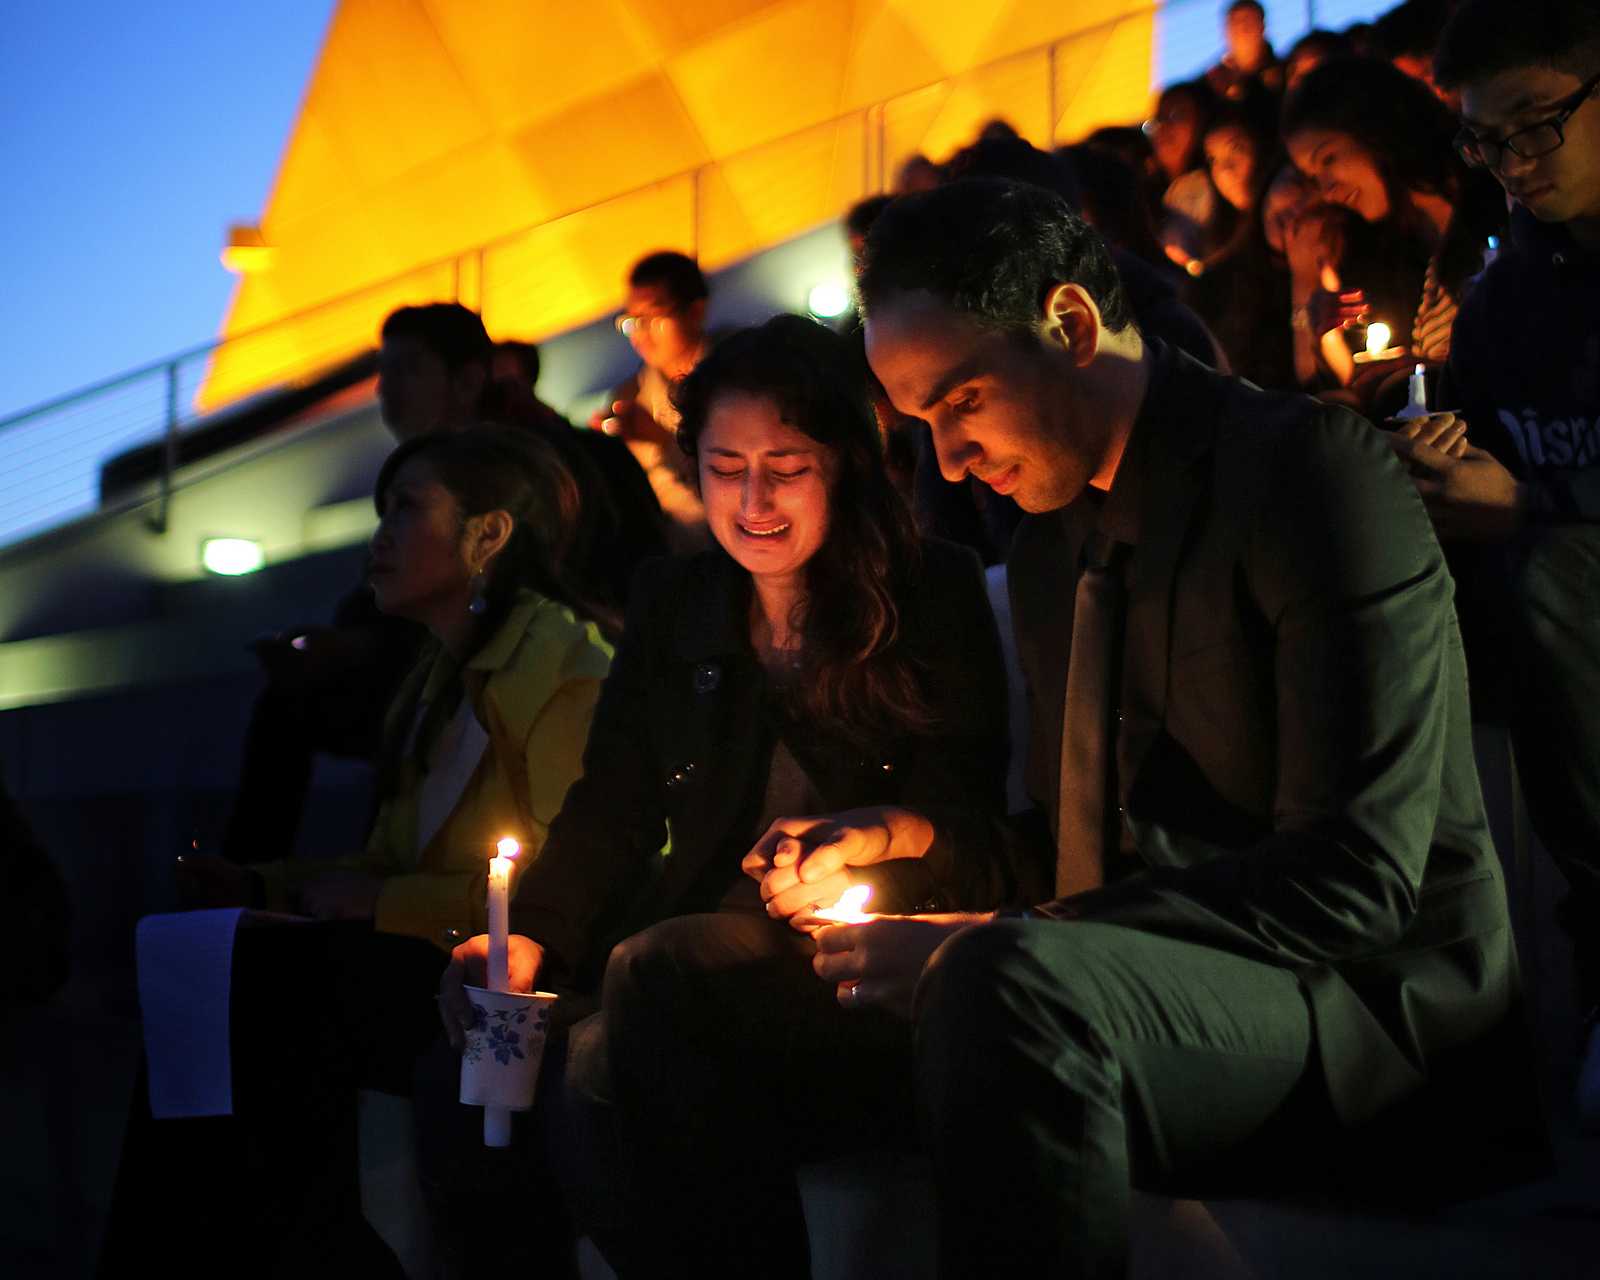 Jessica and Nizar Labidi, sister and brother-in-law of Justin Valdez, attend the candlelight vigil on top of the Cesar Chavez Student Center at SF State for Valdez on Thursday, Sept. 26. Valdez was a SF State student who was shot and killed on Sept. 23 as he got off of the M-Oceanview train in Ingleside. Photo by John Ornelas / Xpress